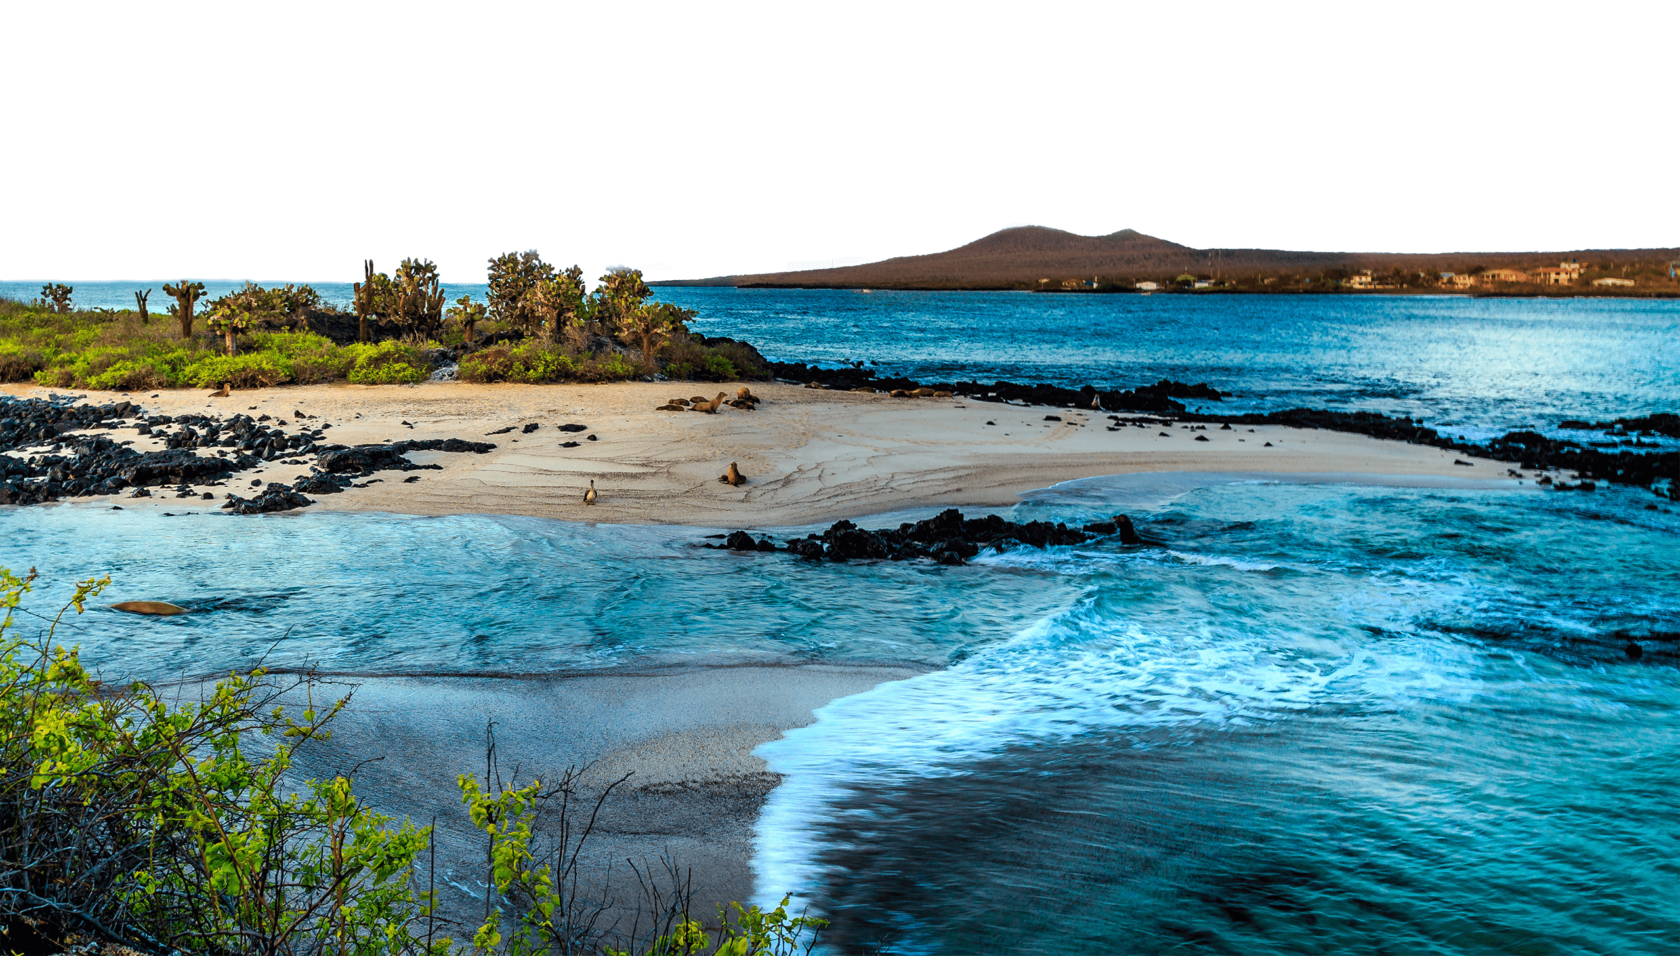 Beach landscapes of the Galapagos Islands.